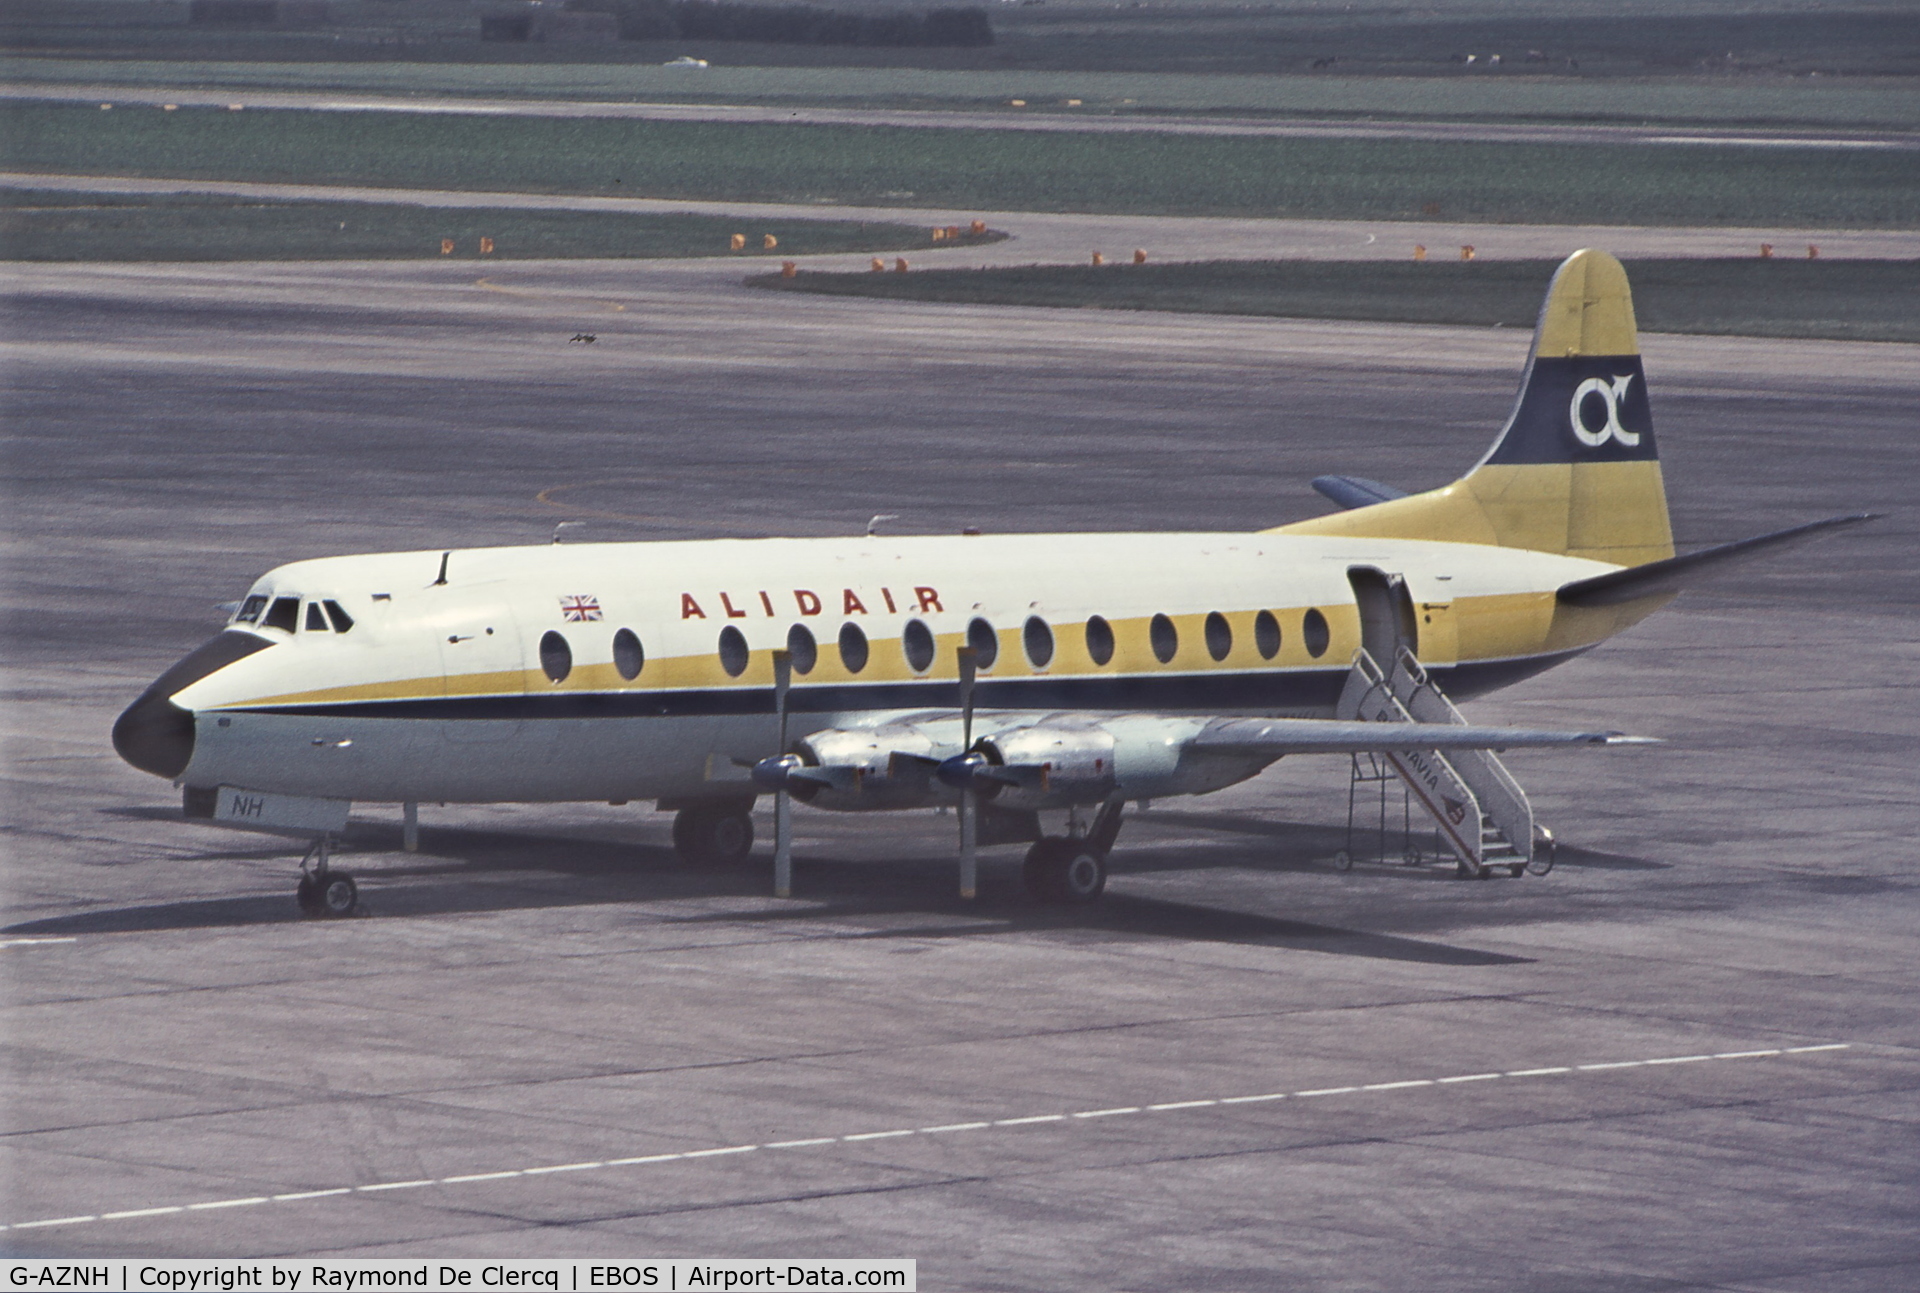 G-AZNH, 1959 Vickers Viscount 814 C/N 342, Ostend Airport in late 70's.